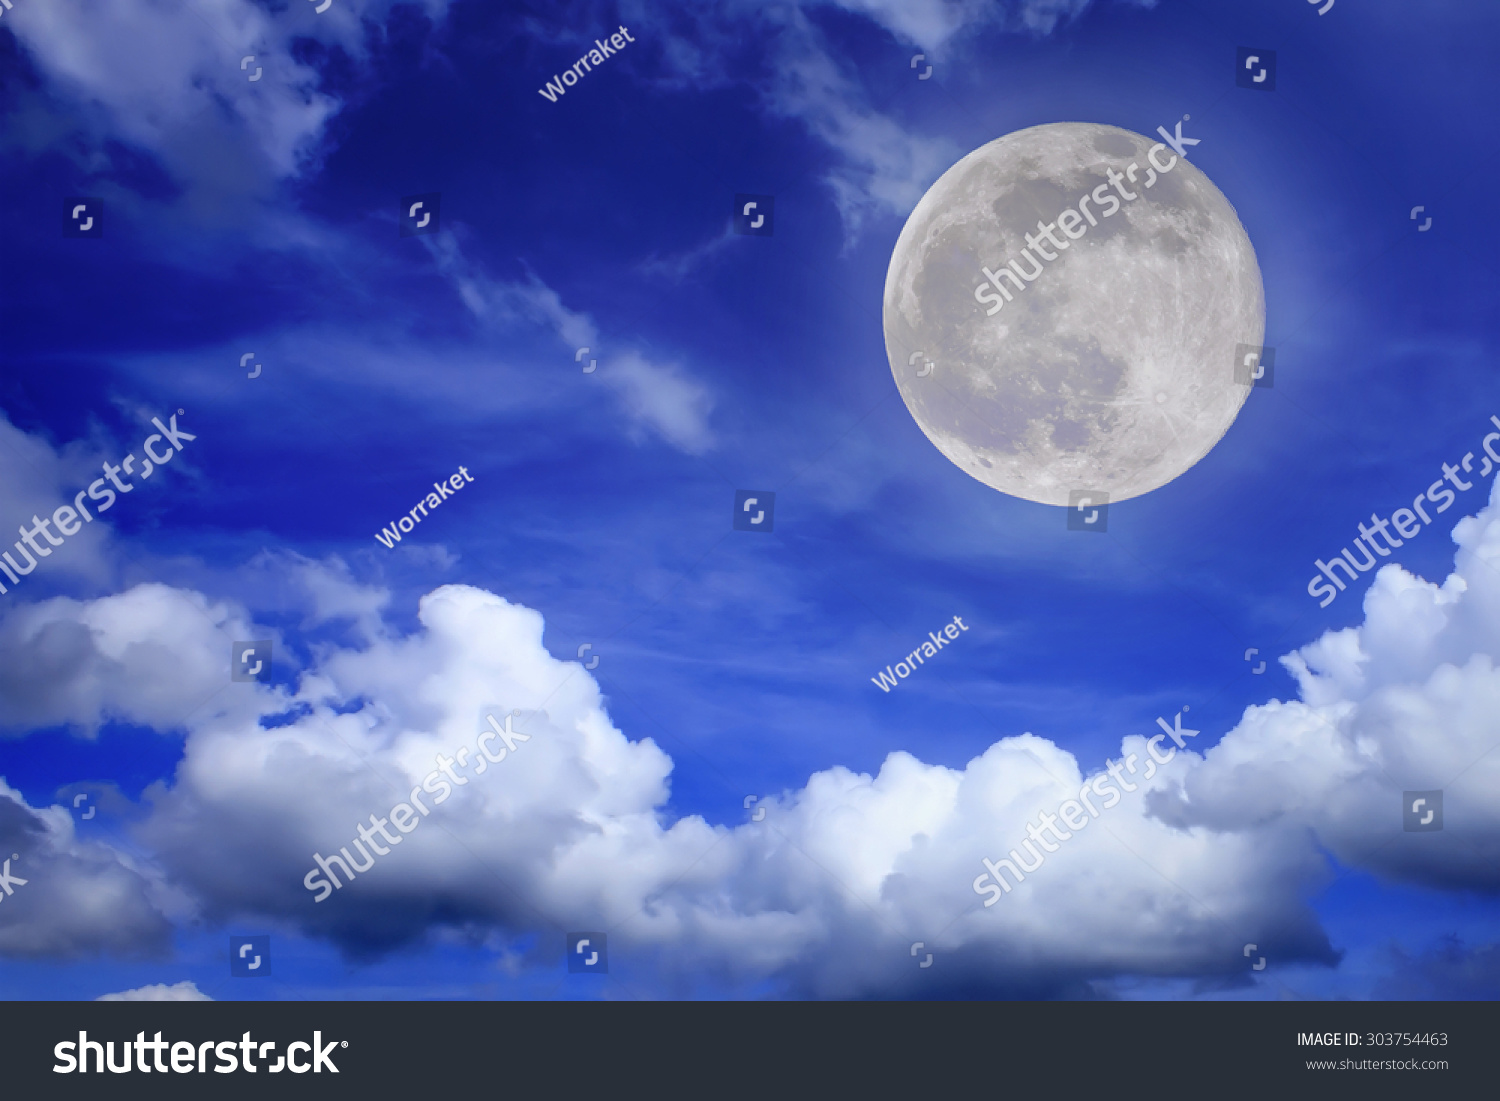 Big Moon On A Cloudy Sky Stock Photo 303754463 : Shutterstock